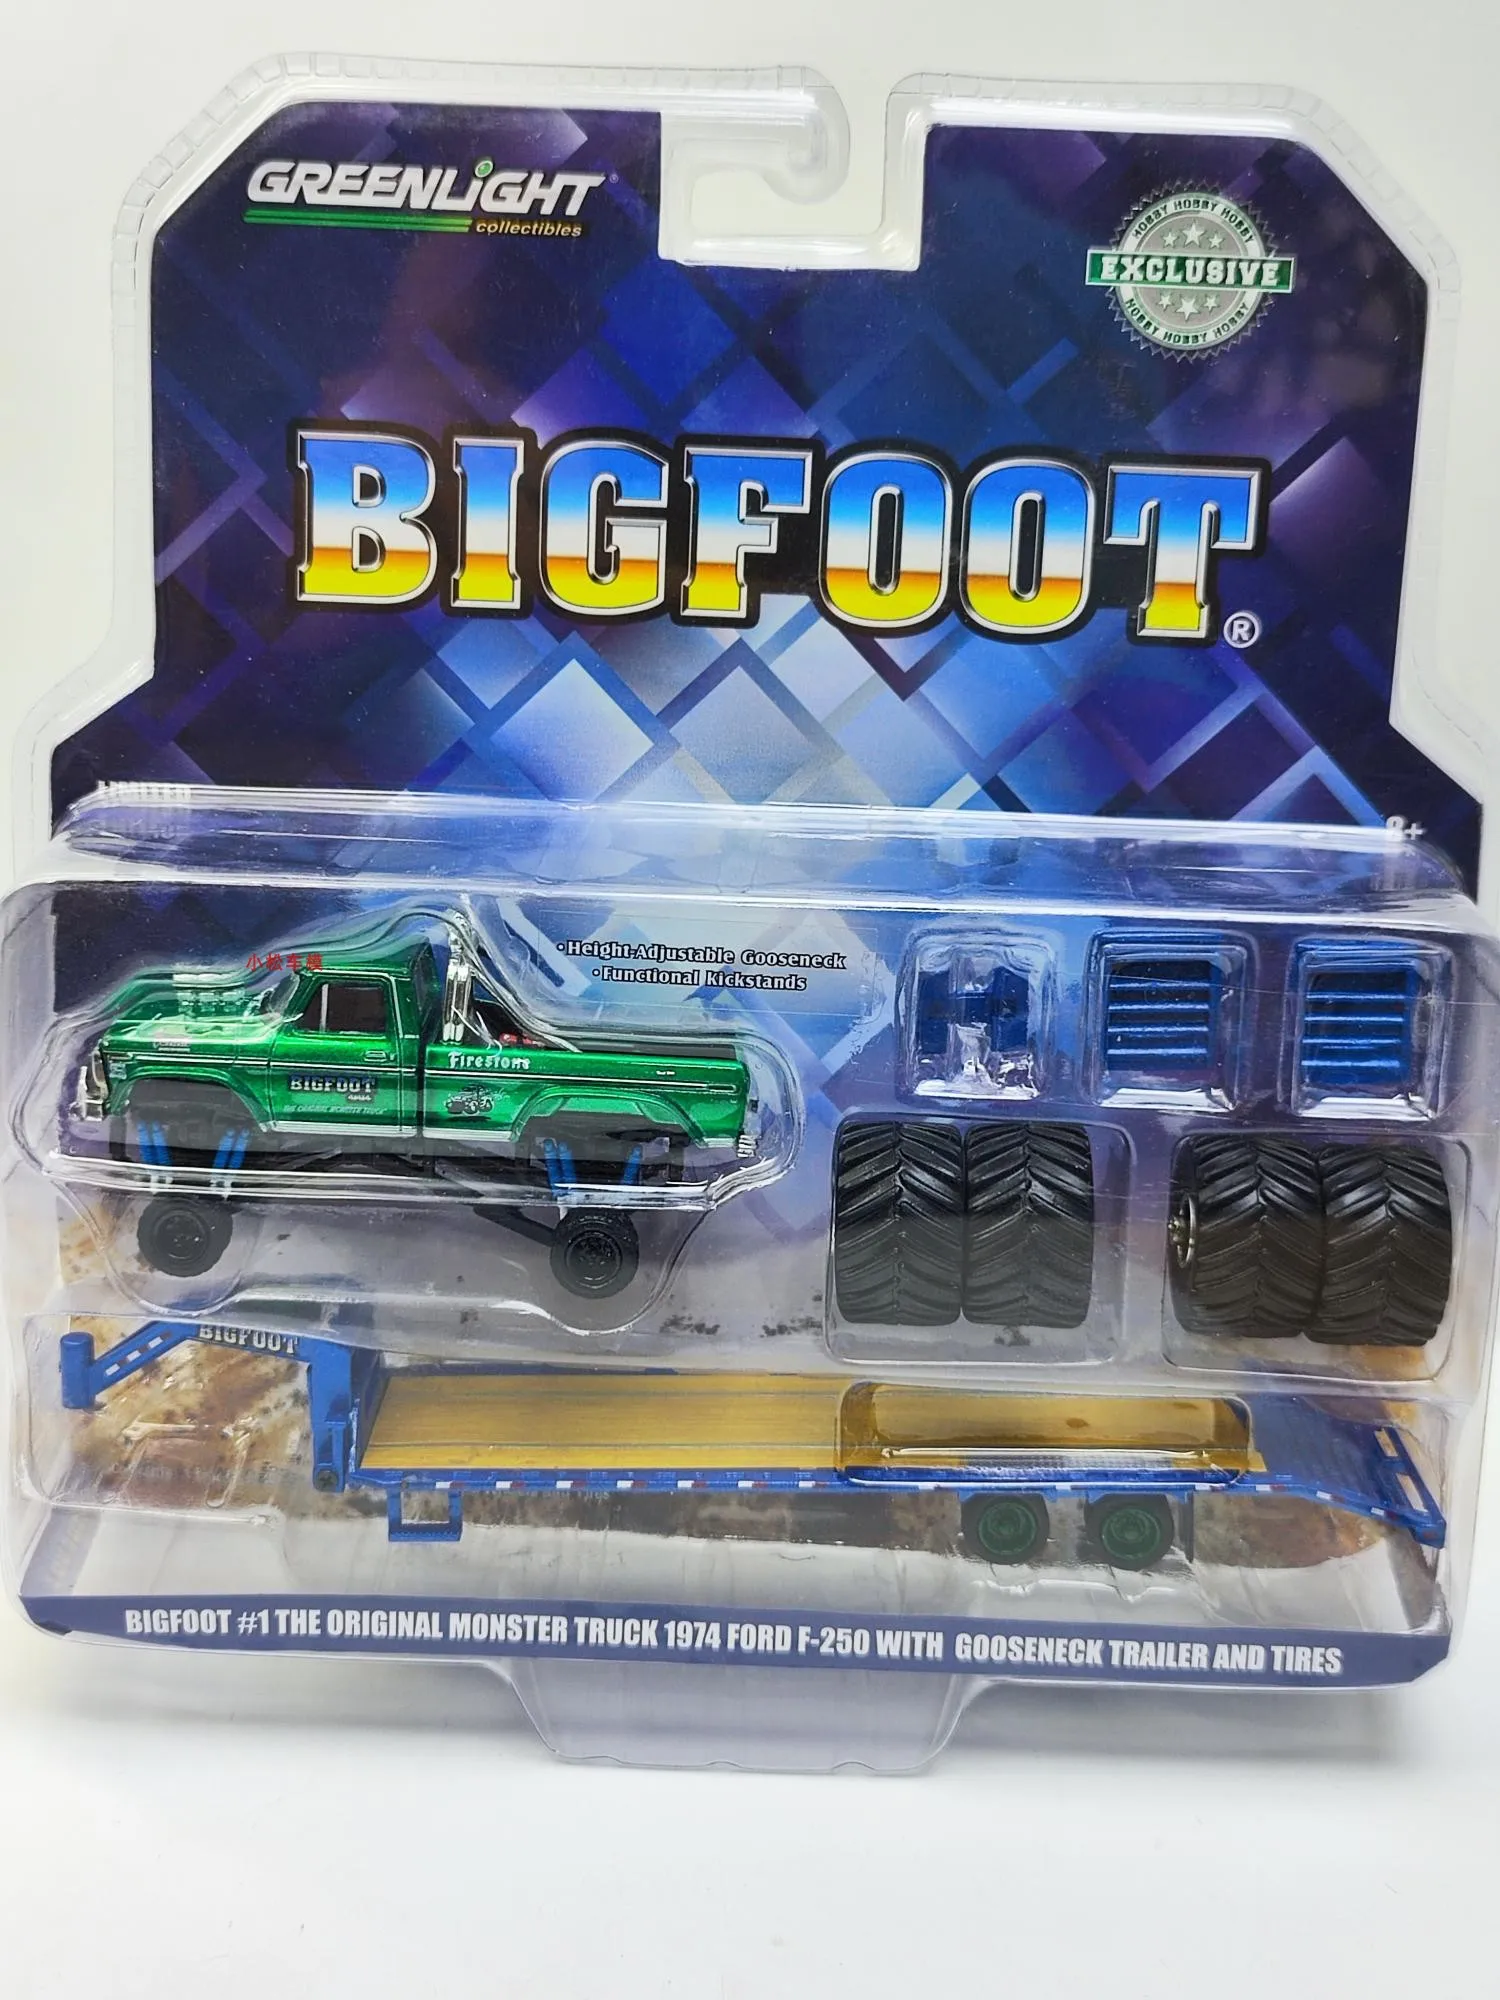 

GreenLight 1/64 Scale Die-Cast Car Model Toys 1974 Ford F-250 With Gooseneck Trailer And Tires Diecast Metal Vehicle Toy For Boy